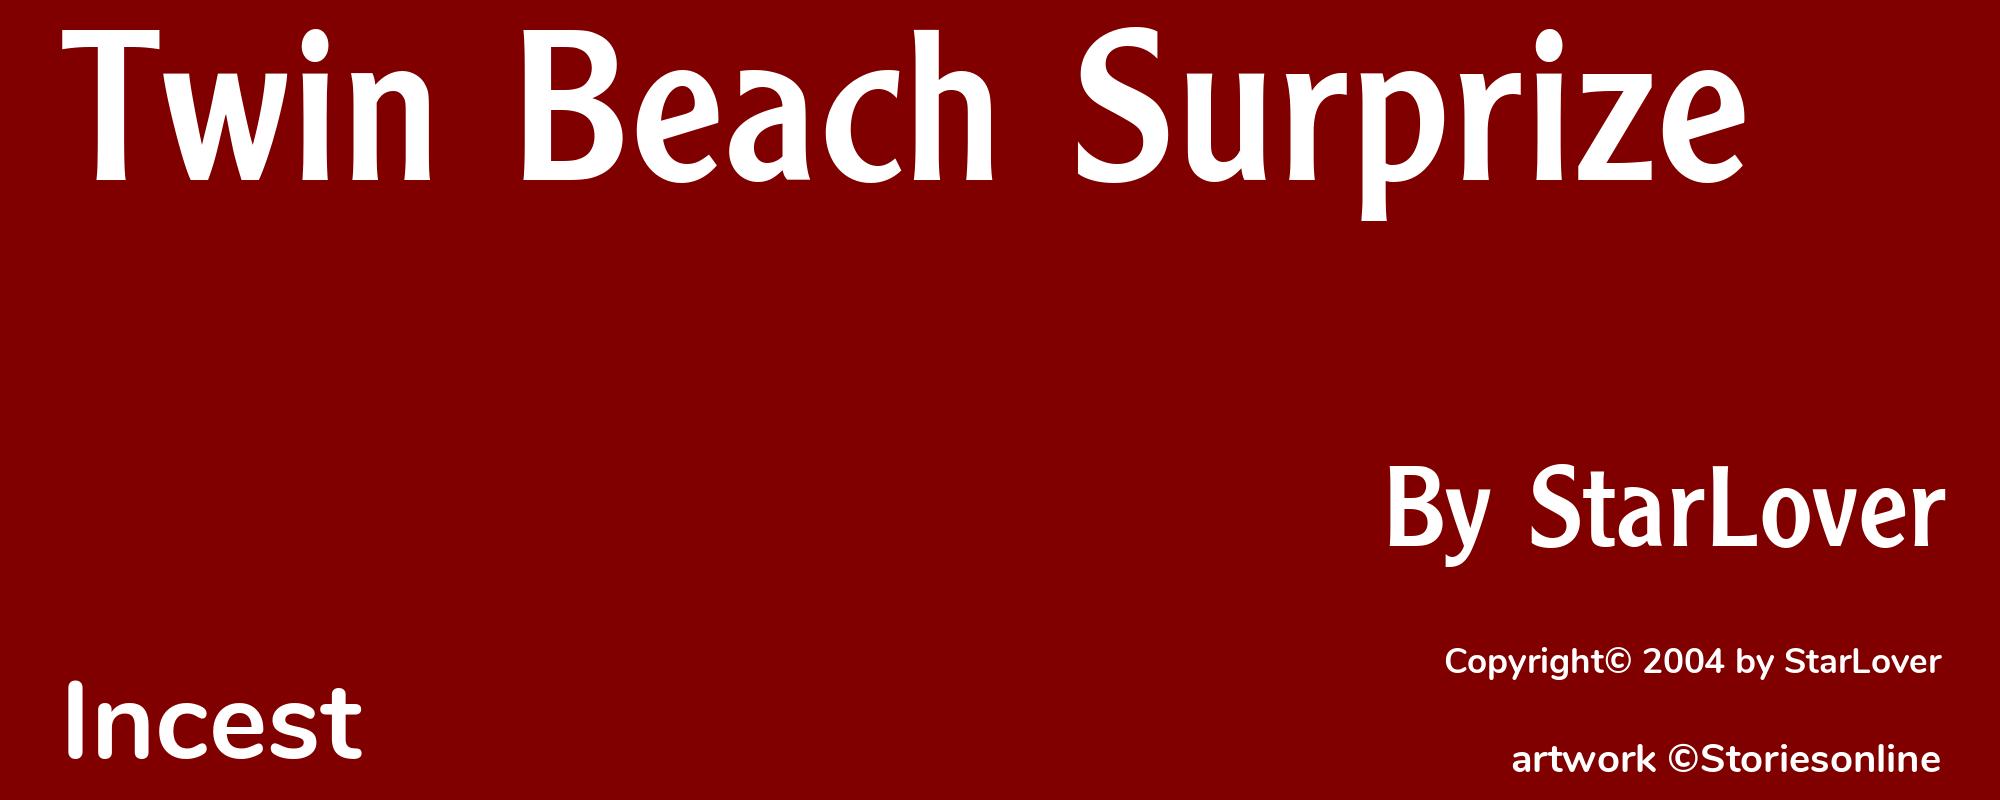 Twin Beach Surprize - Cover